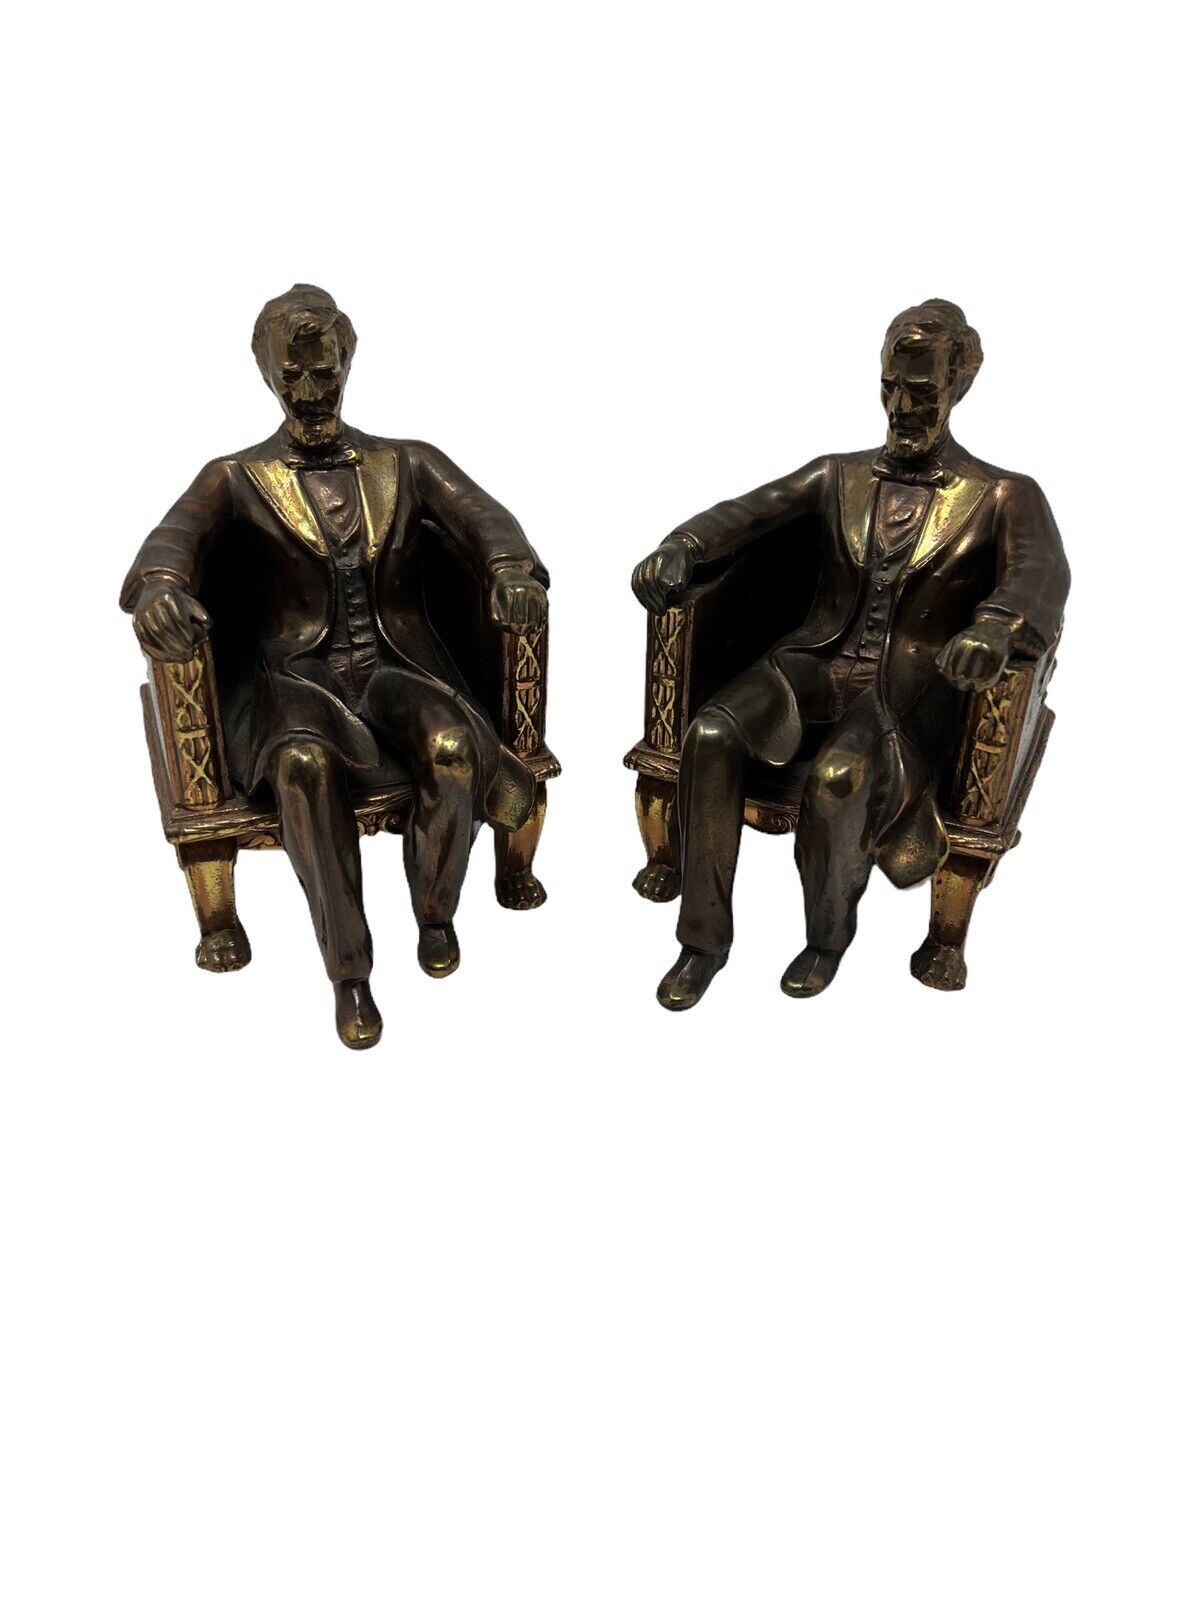 Pair of Vintage Abraham Lincoln Bookends by Dodge